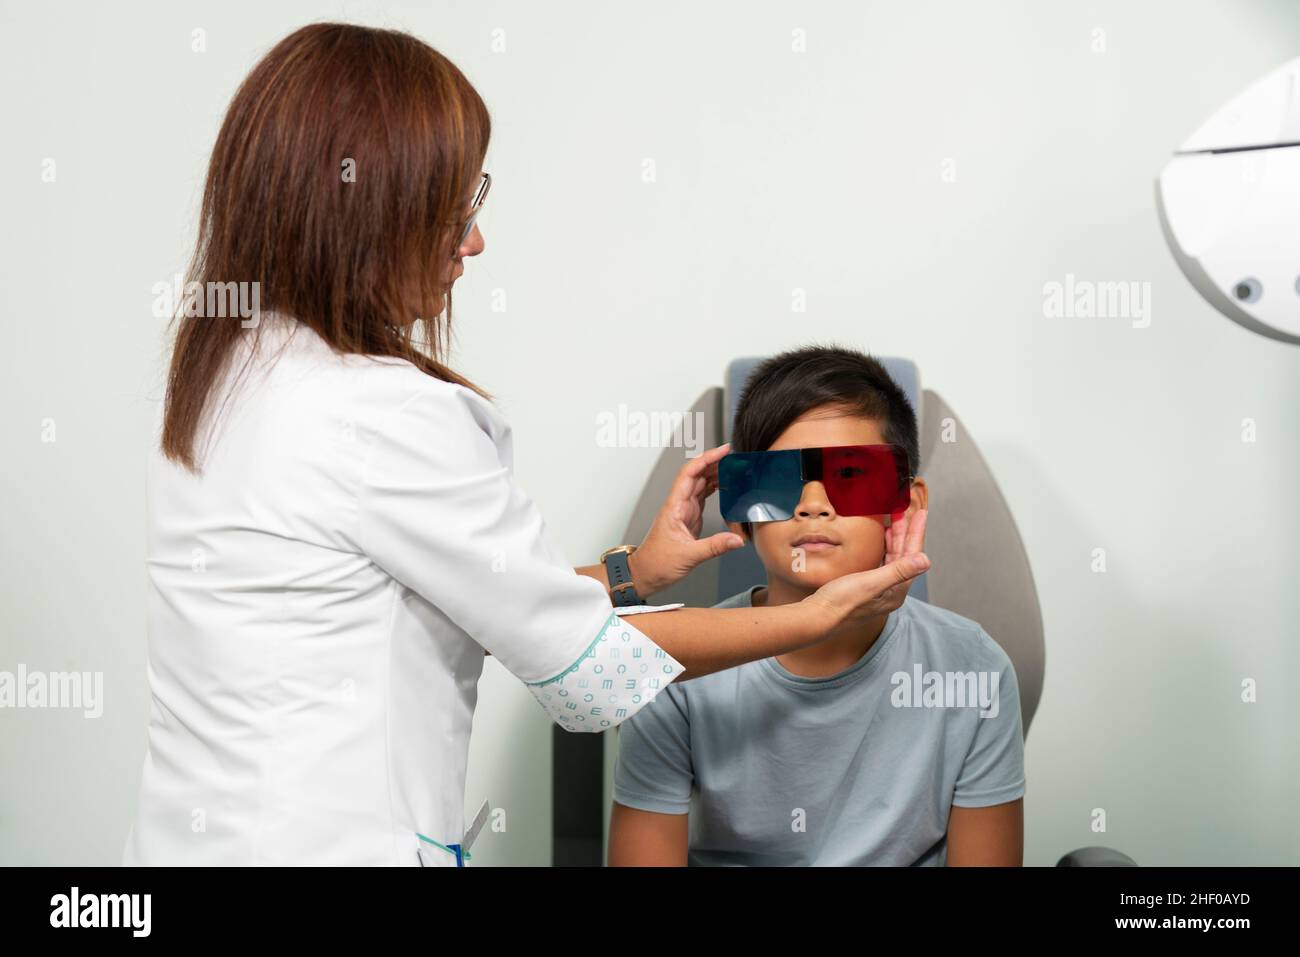 Asian boy in a duochrome test review with red and green 3D glasses Stock Photo